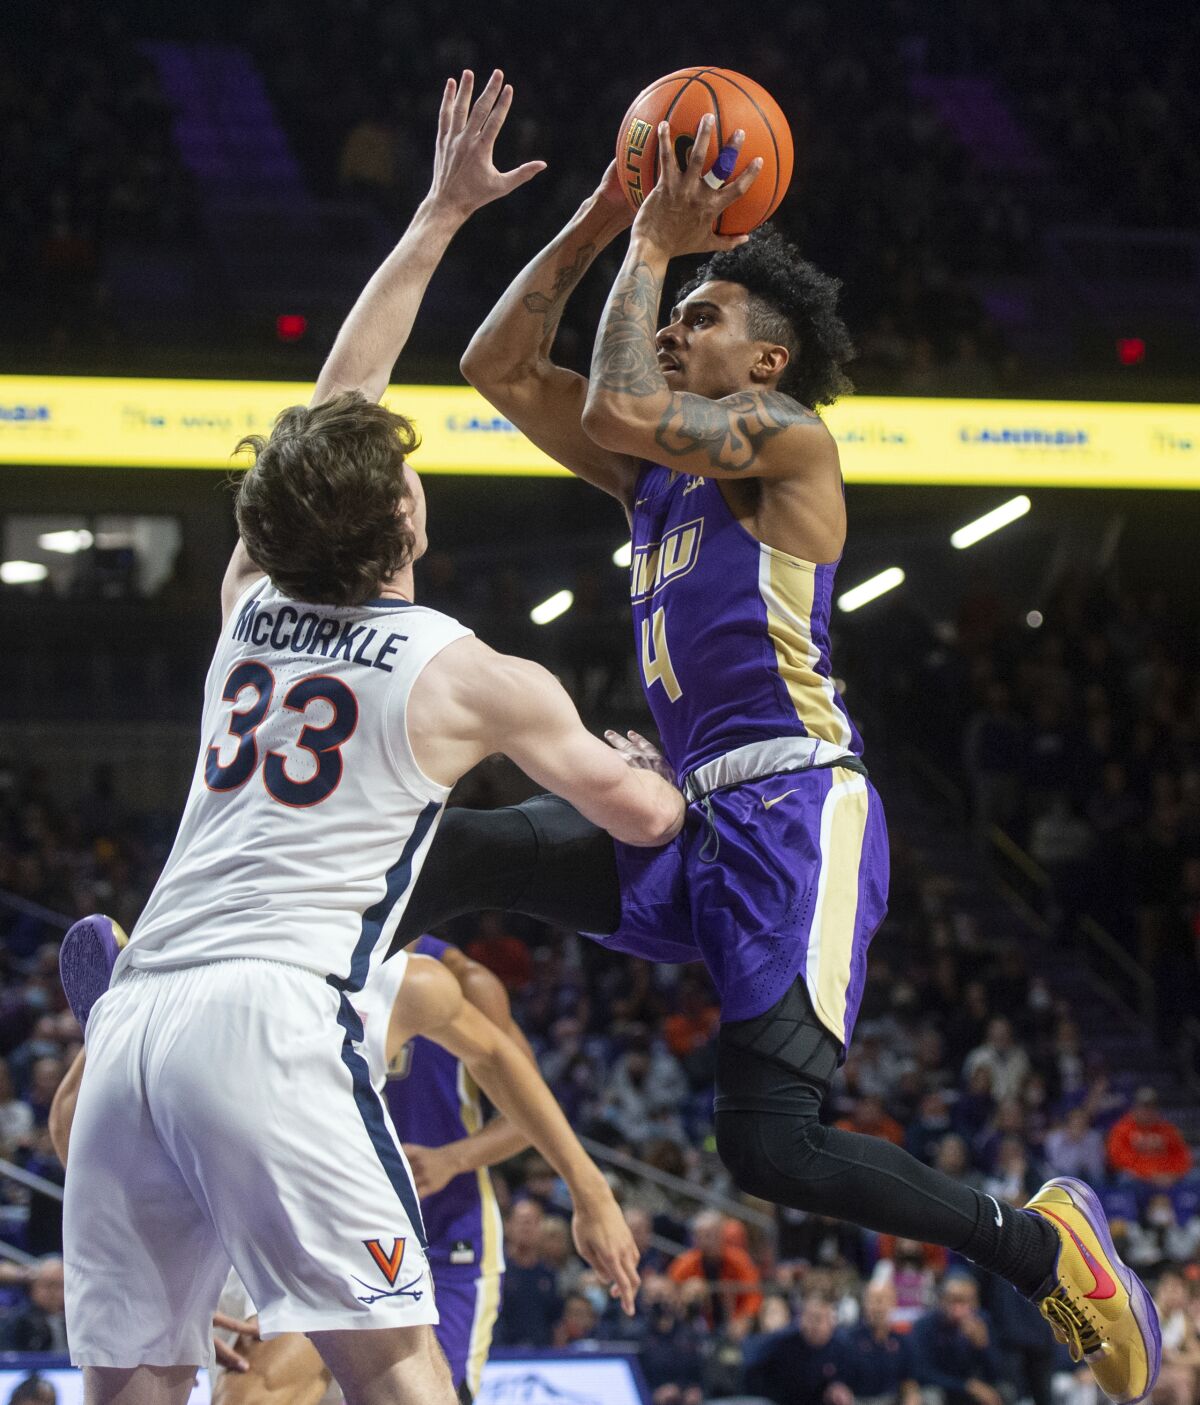 James Madison guard Vado Morse (4) goes up for a shot over Virginia guard Carson McCorkle (33) during the second half of an NCAA college basketball game, Tuesday, Dec. 7, 2021, in Harrisonburg, Va. (Daniel Lin/Daily News-Record via AP)